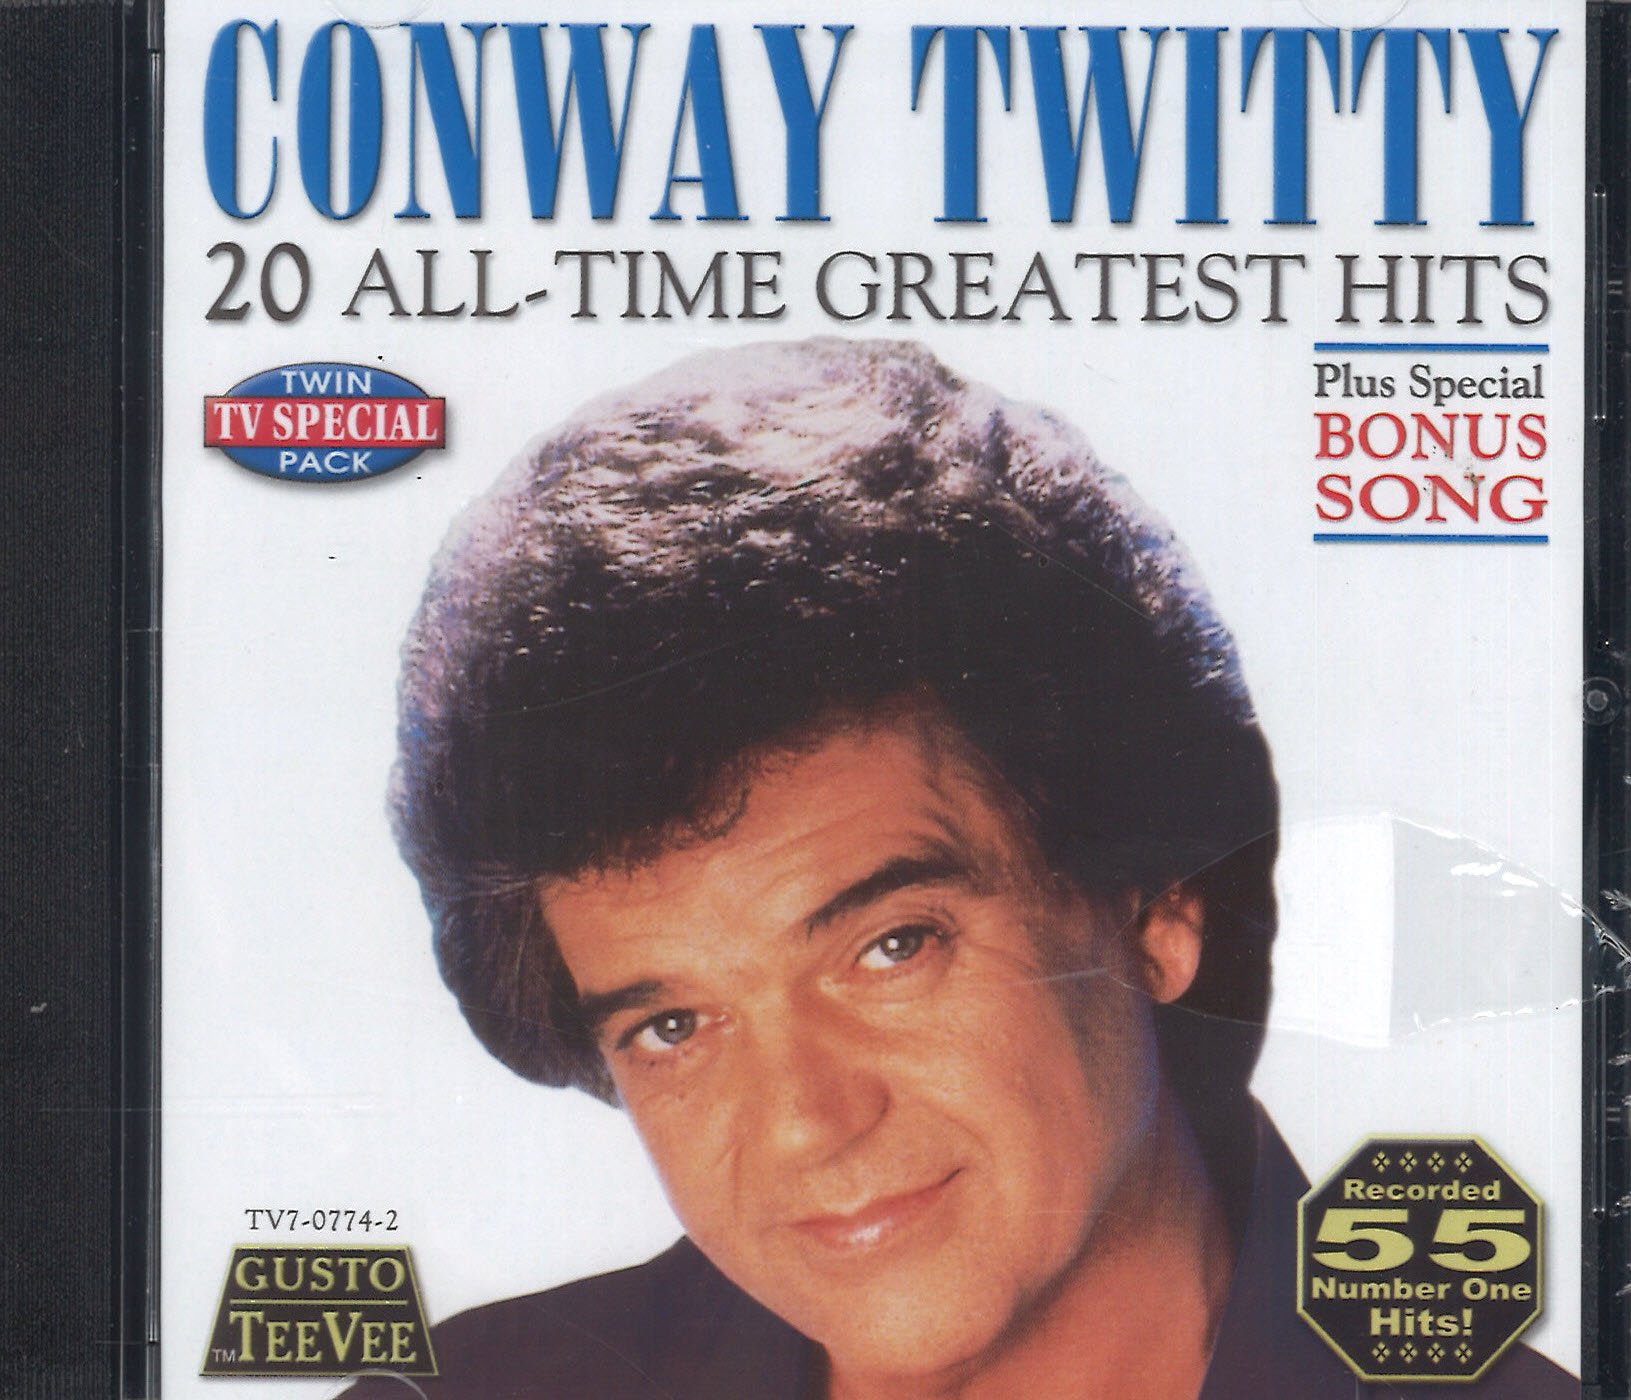 Conway Twitty 20 All-Time Greatest Hits plus bonus song